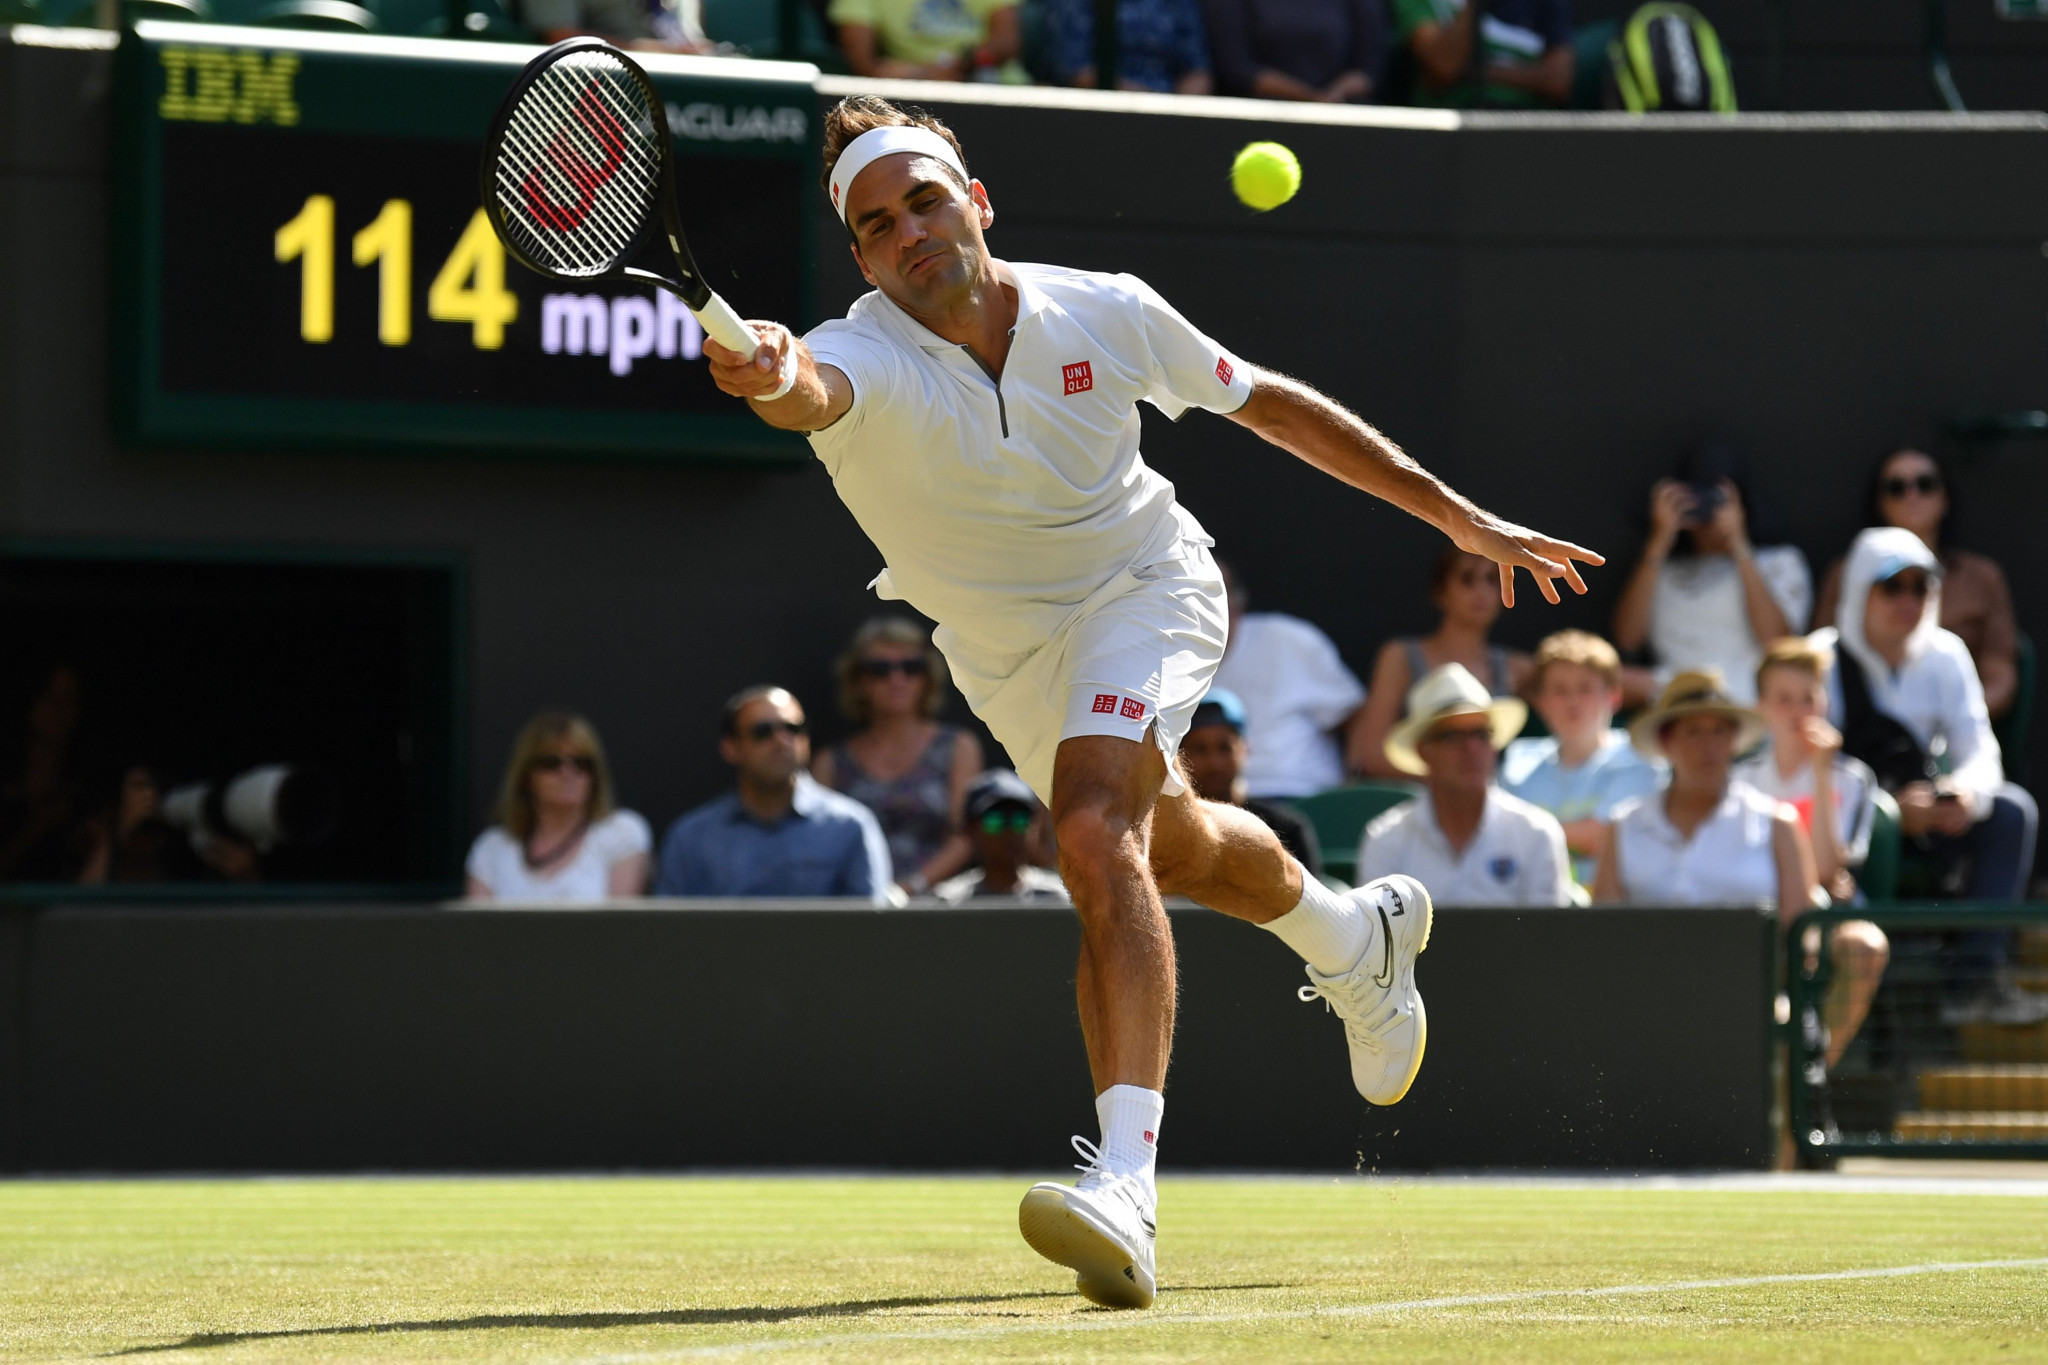 Roger Federer continued his pursuit of a ninth Wimbledon title by despatching Jay Clarke of Britain in straight sets ©Getty Images